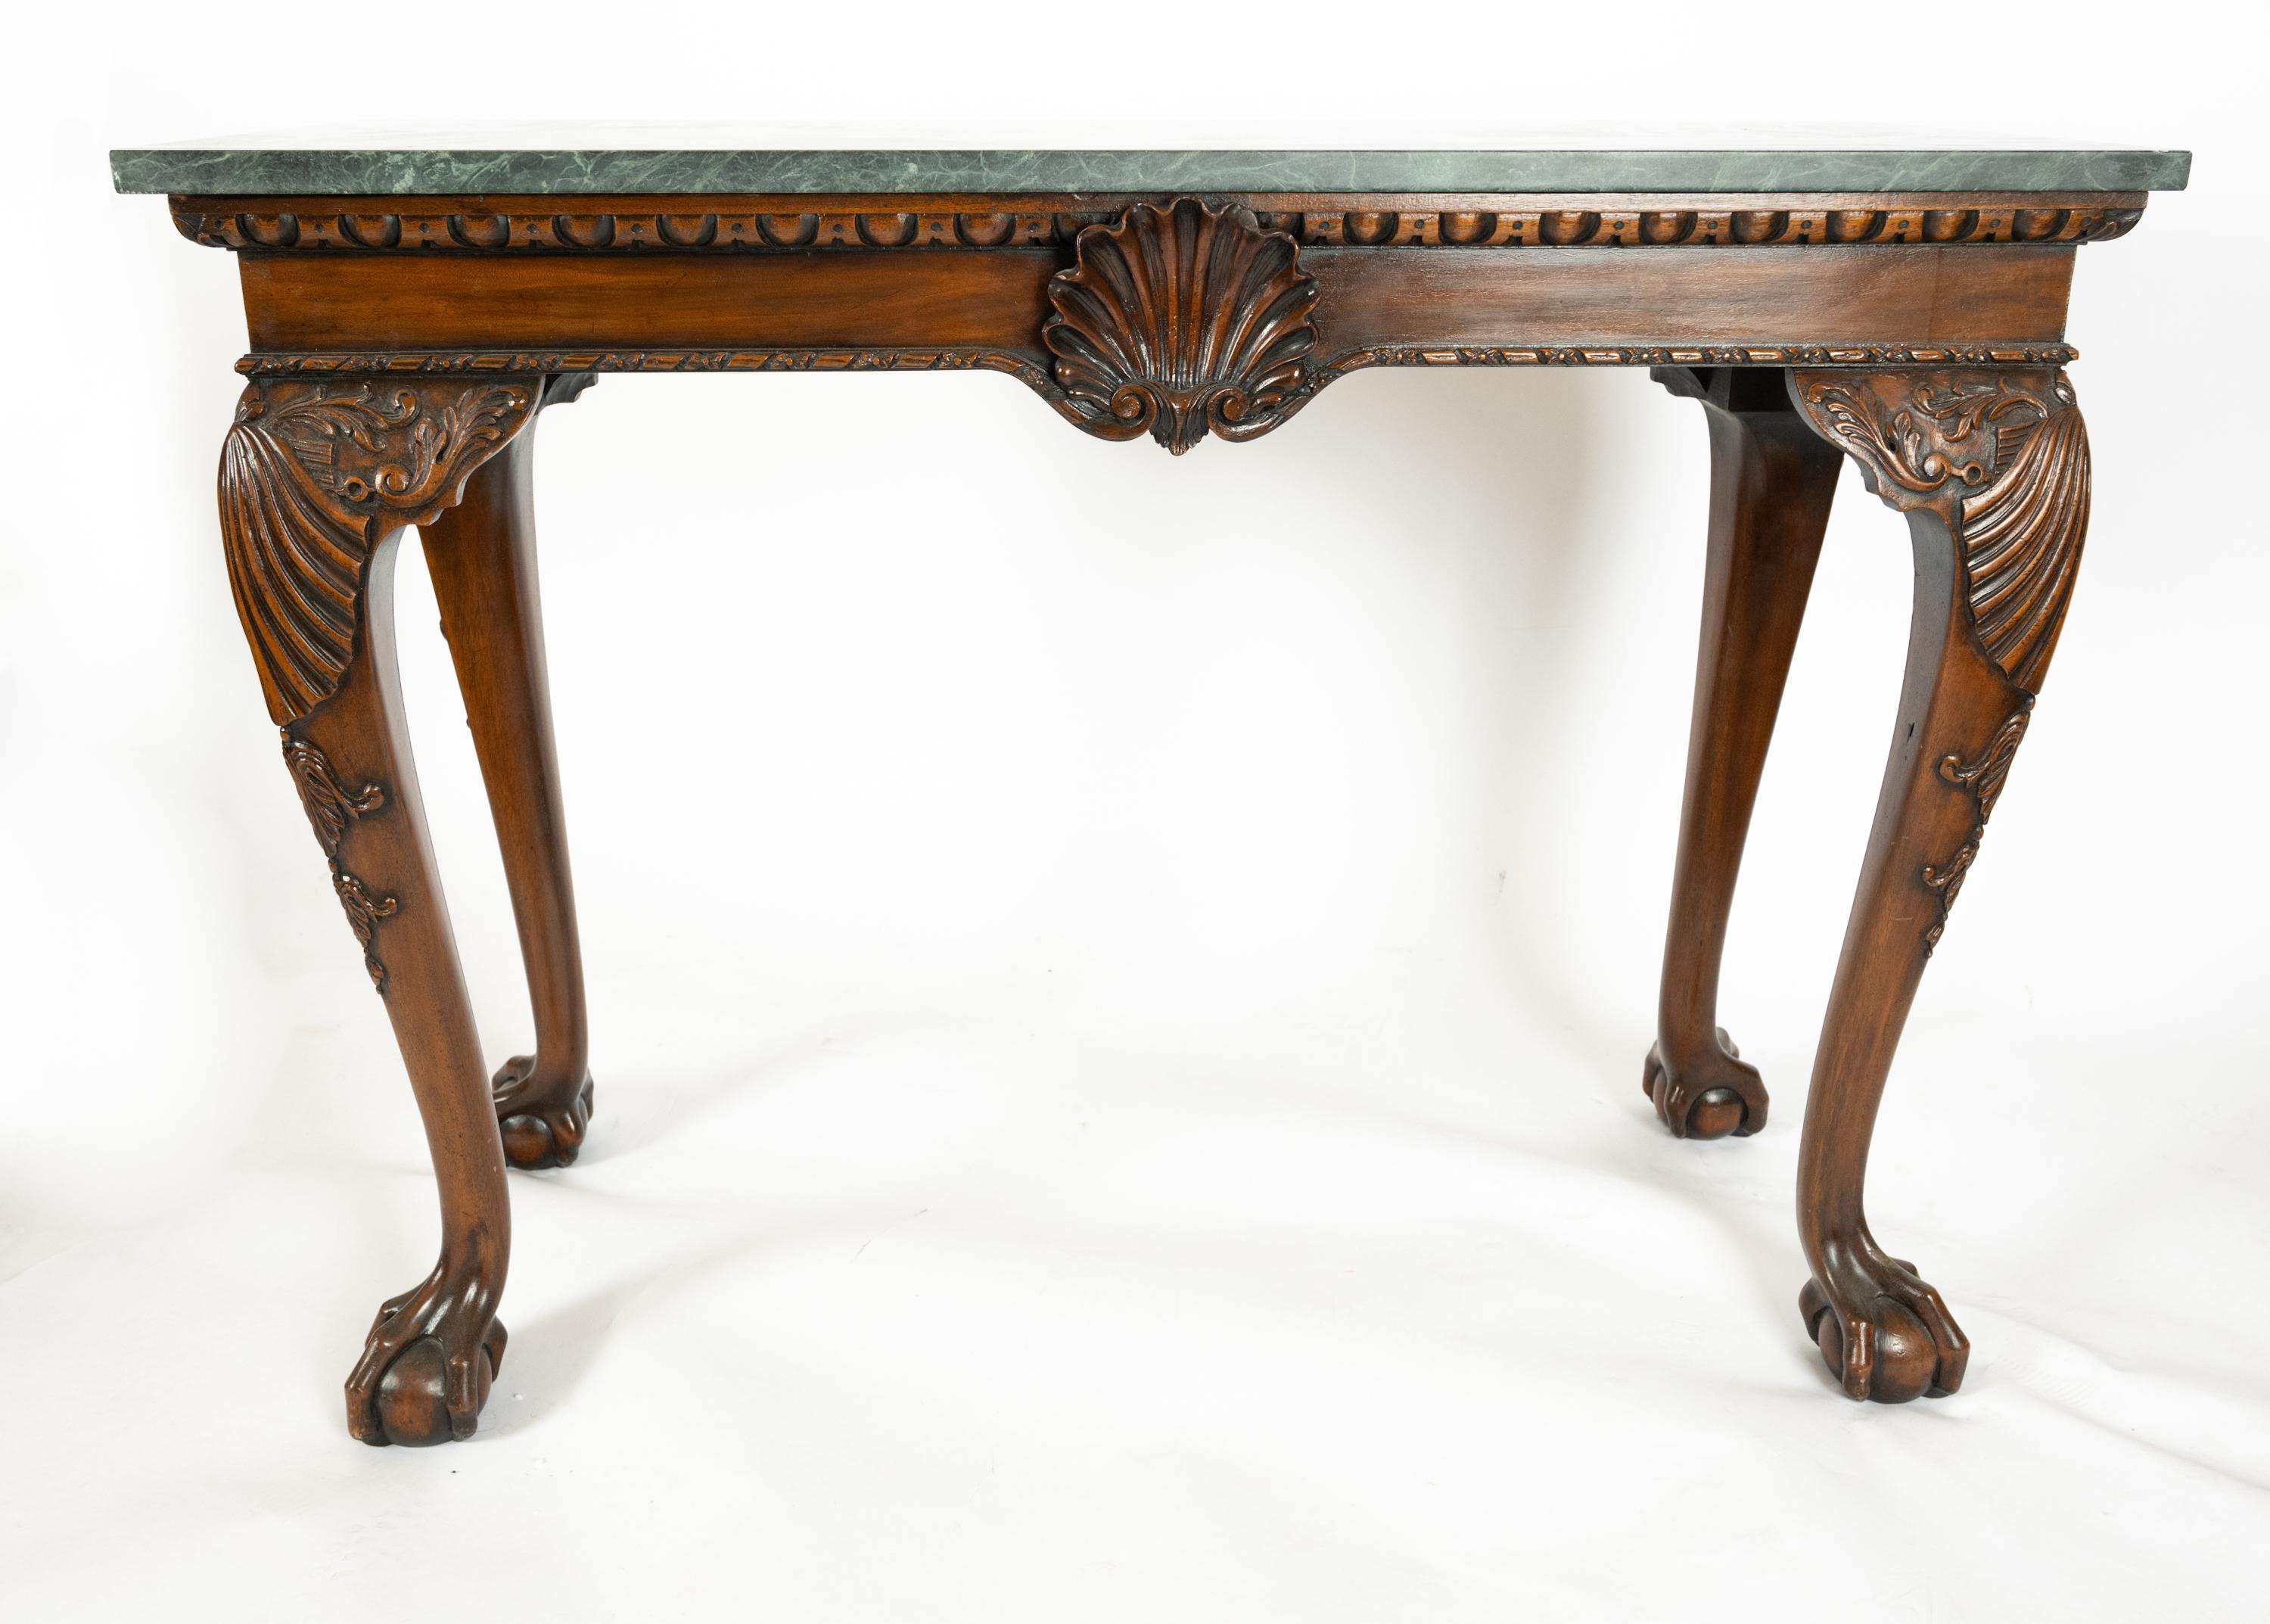 A pair of Georgian-Style Console Tables having green marbled tops and mahogany frames with intricate scalloped decorations. Finished on four sides with a shell motif on front and a surrounding egg and dart border. The cabriole legs having carved